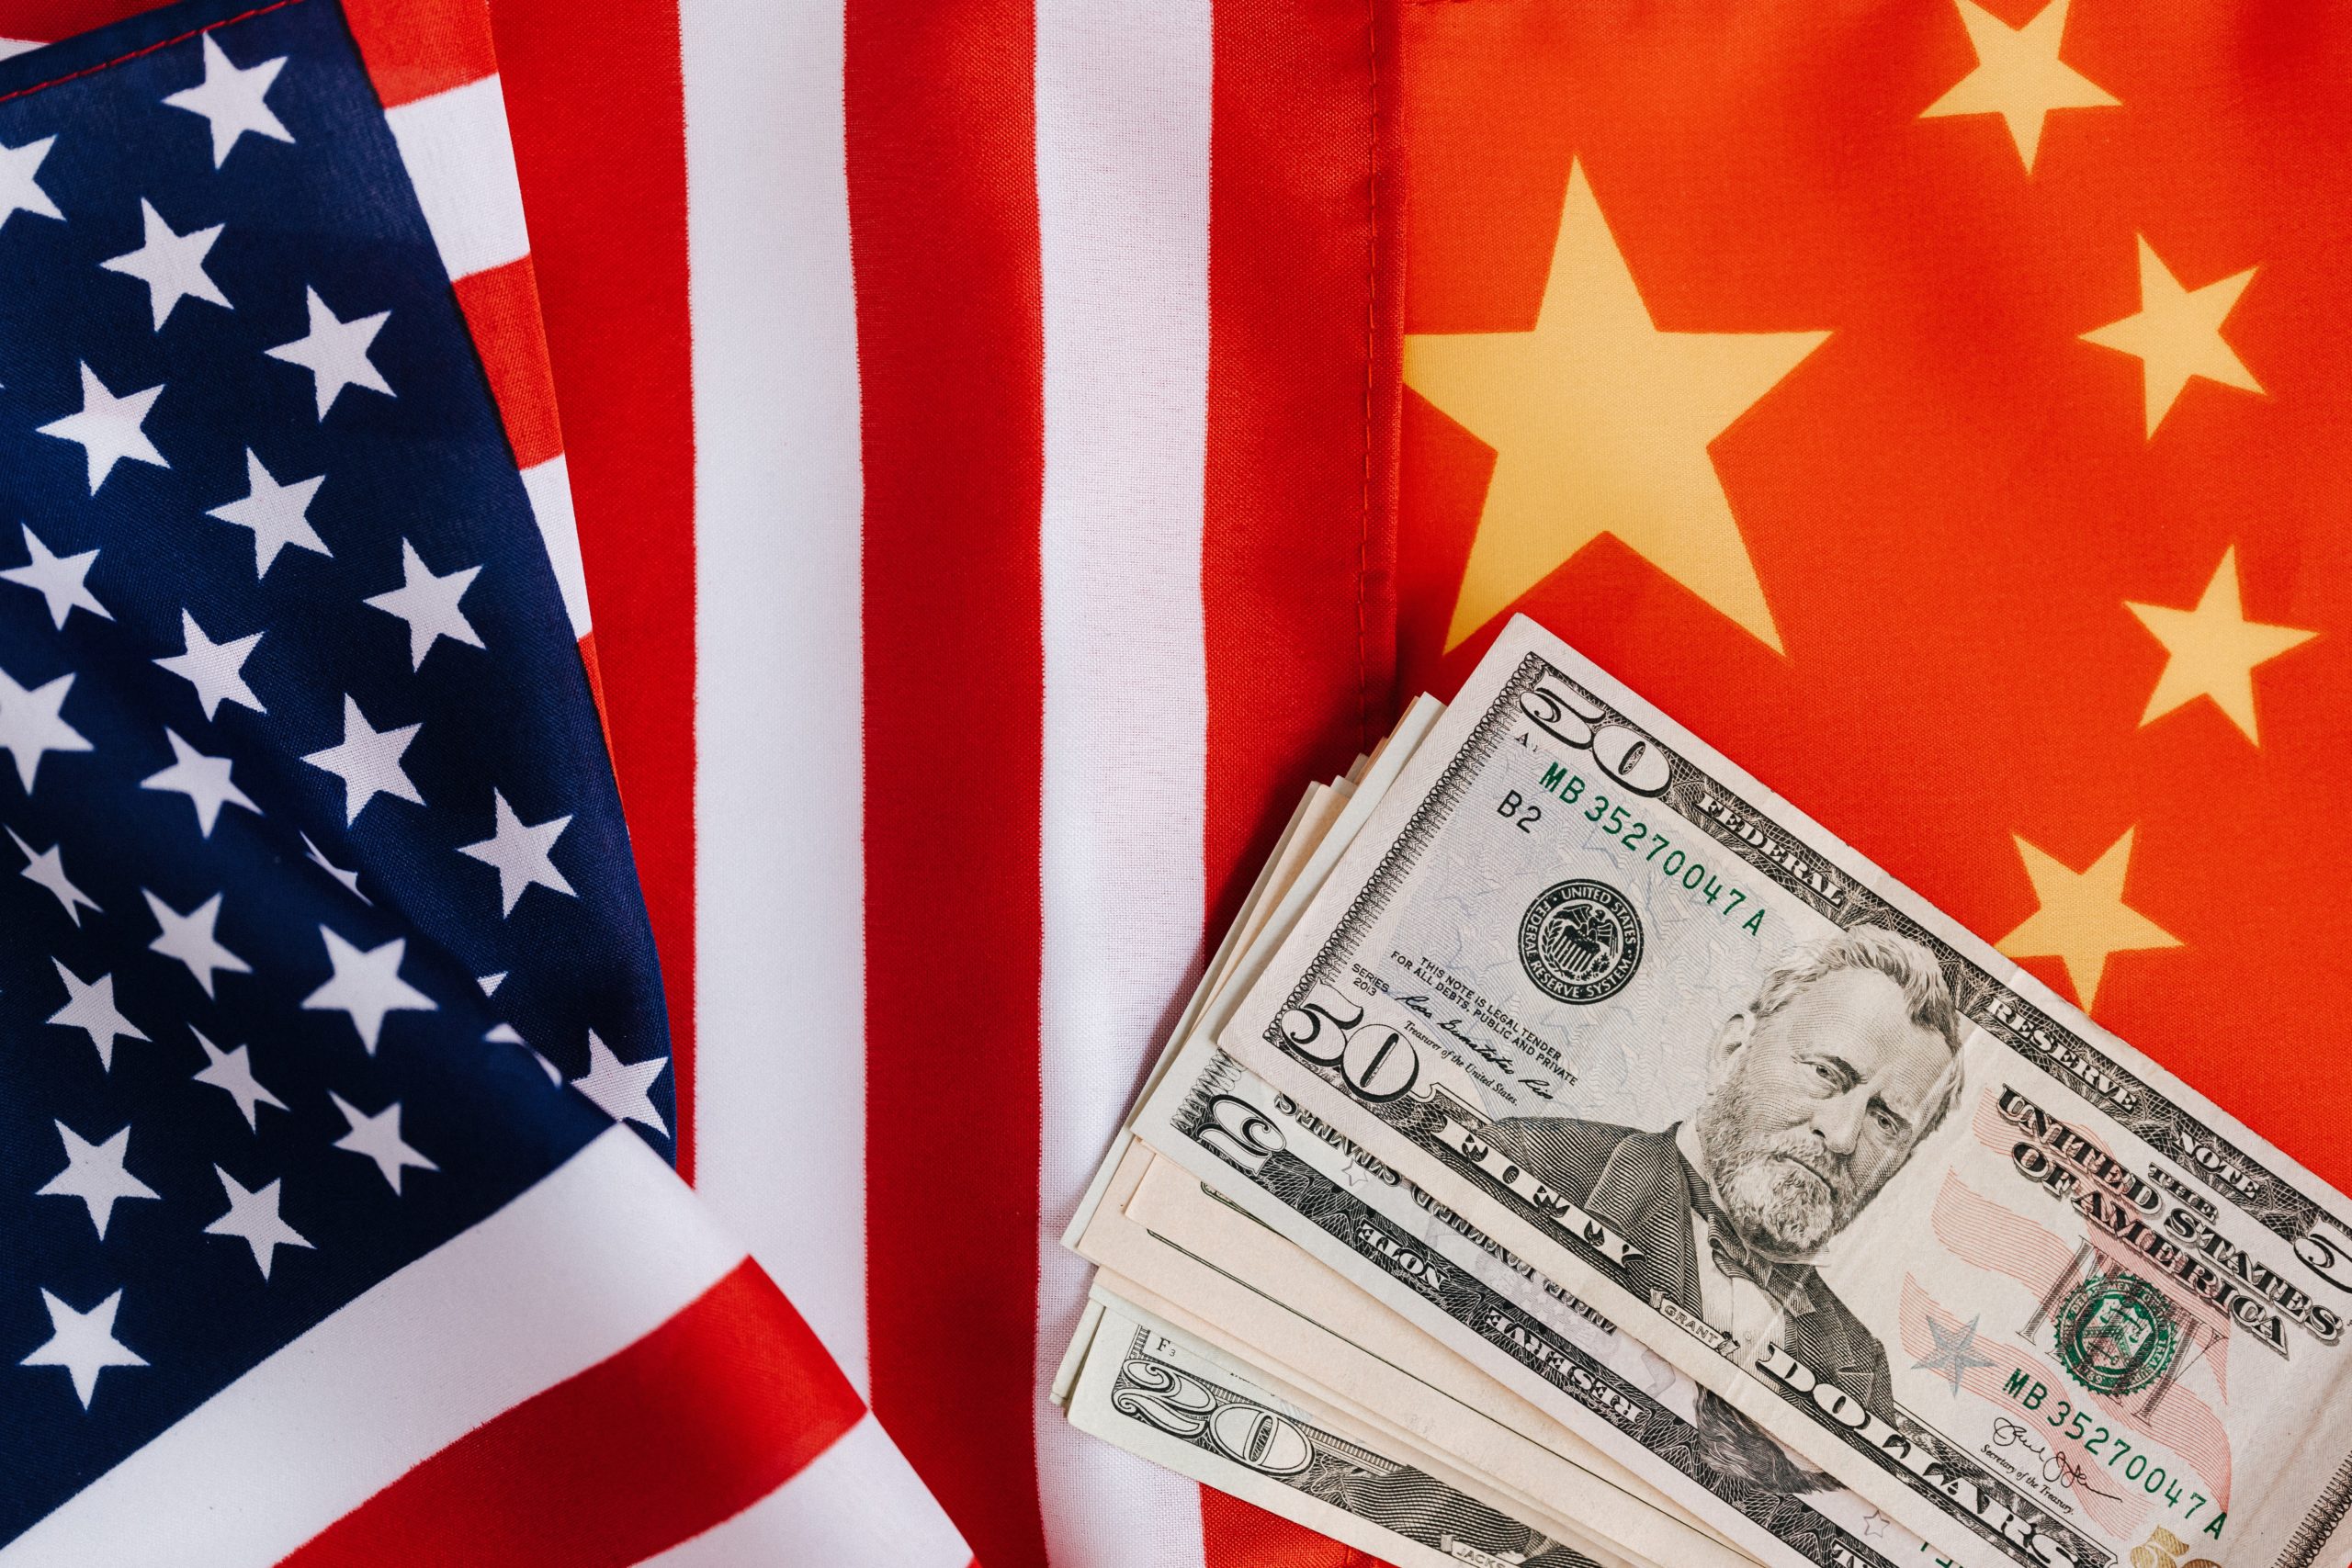 News the US, Mexico & Canada have now managed to strike a new deal (USMCA) was not enough to offset the bearish sentiment surrounding current US Chinese trade discussions.